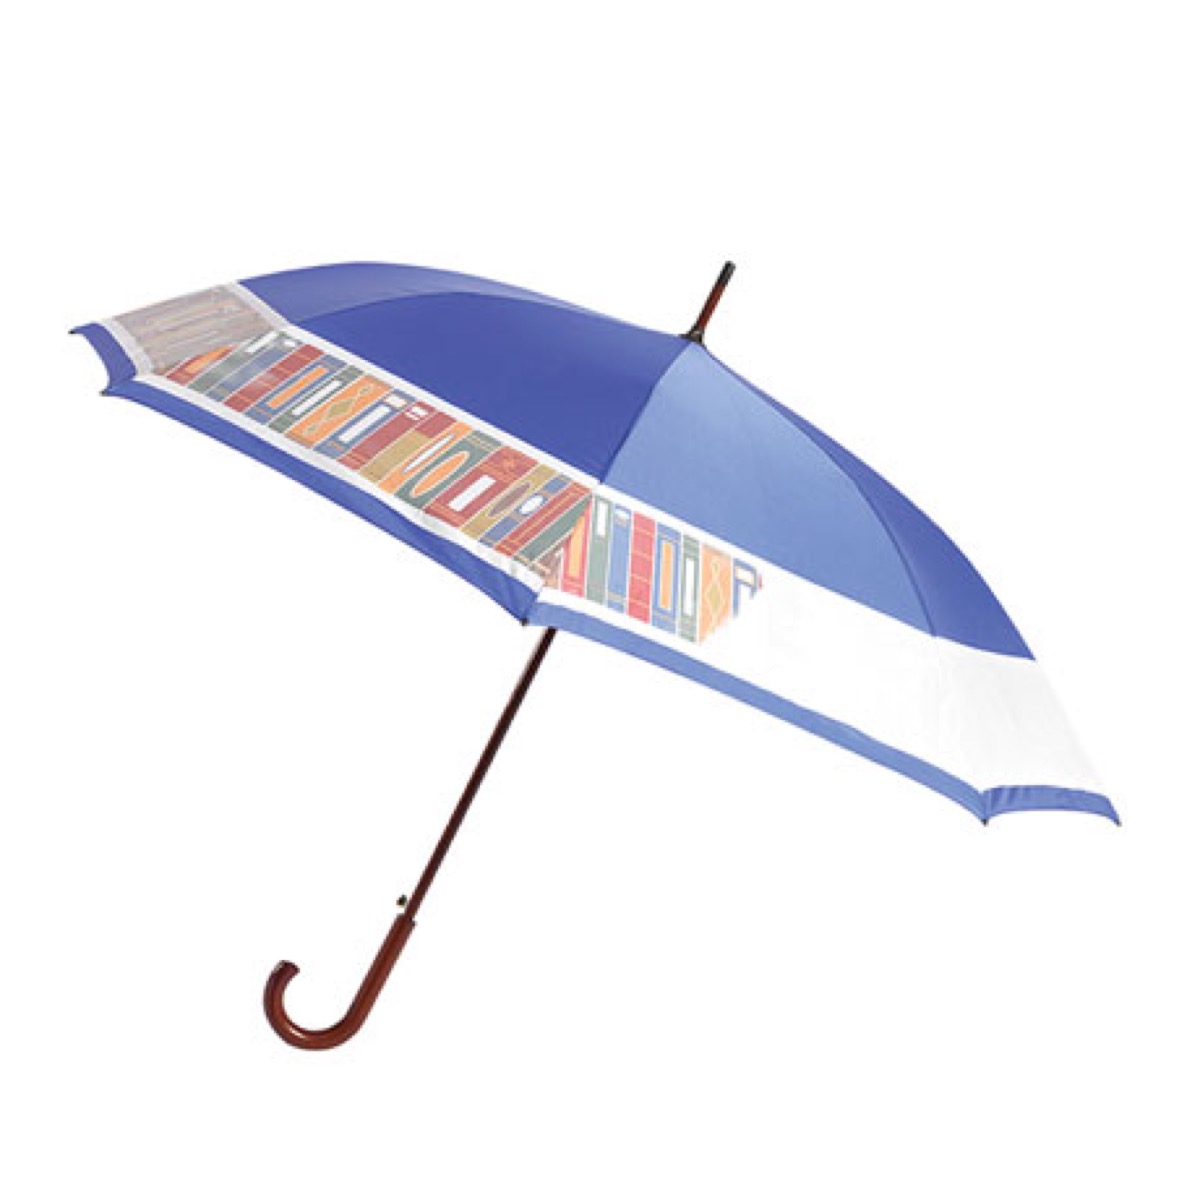 color changing umbrella with bookshelf design, gifts for book lovers